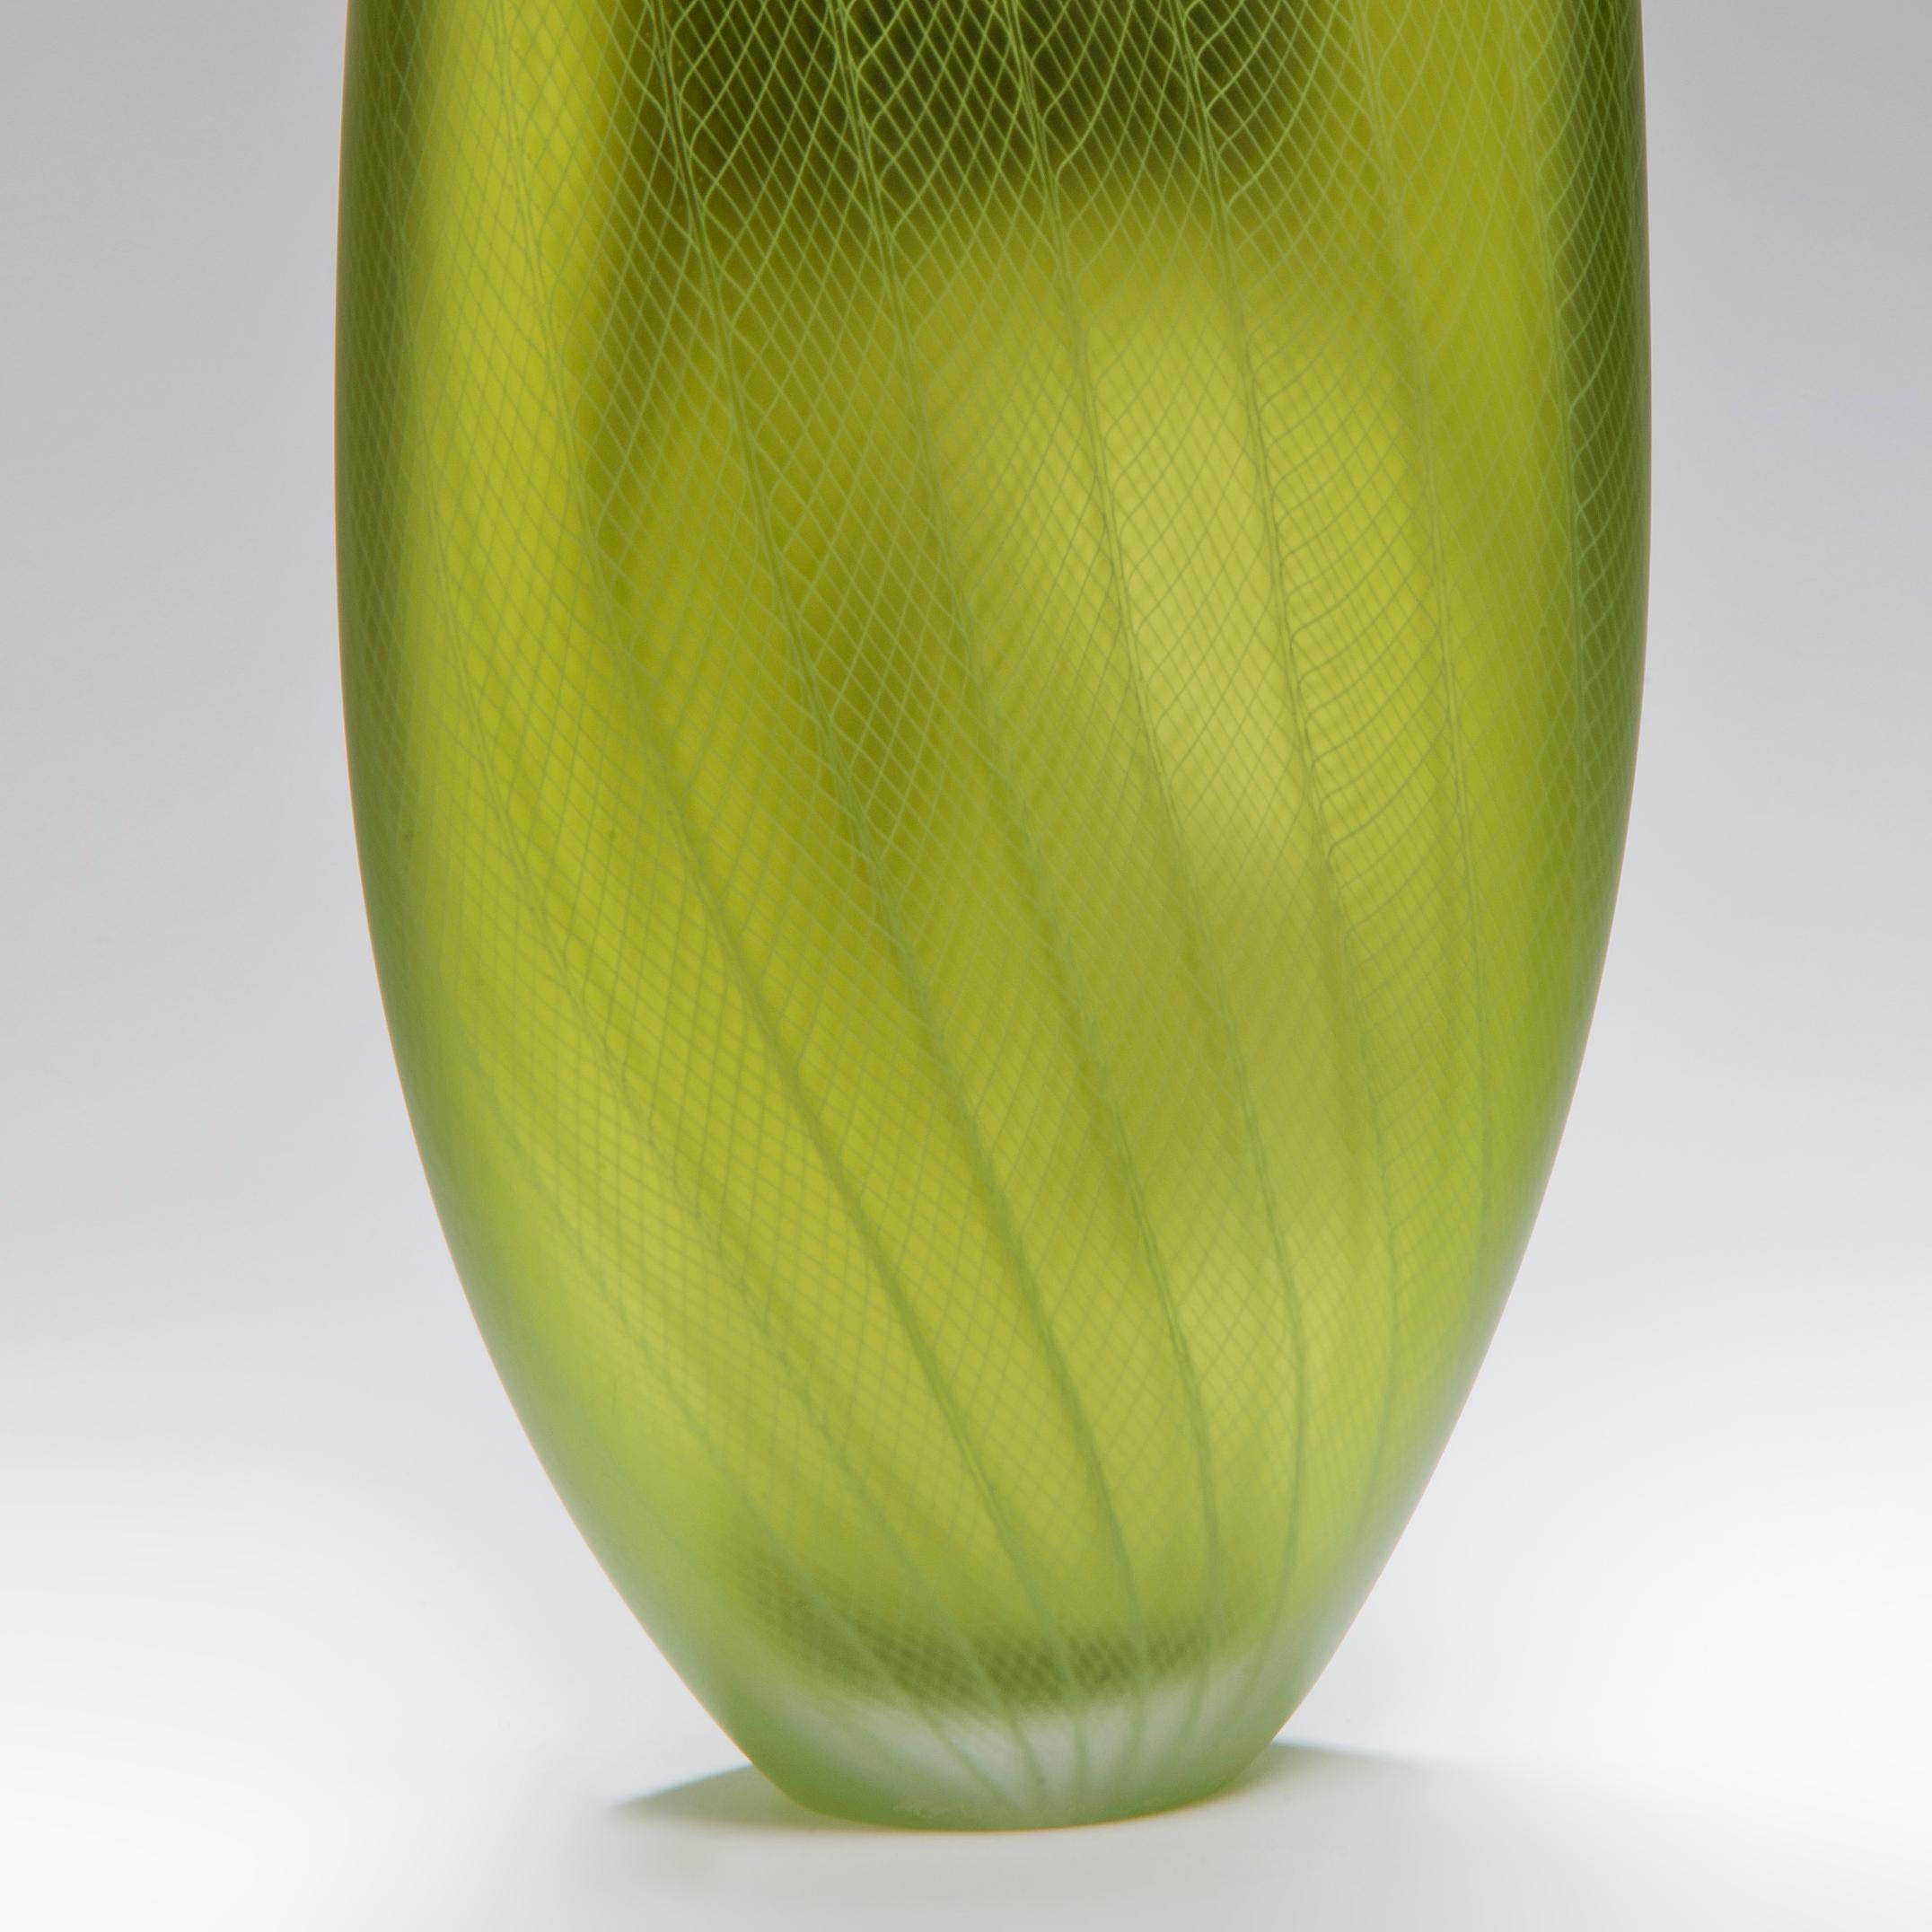 British Stratiform Aerugo 1.0.001, Unique Green Glass Sculpture by Liam Reeves For Sale